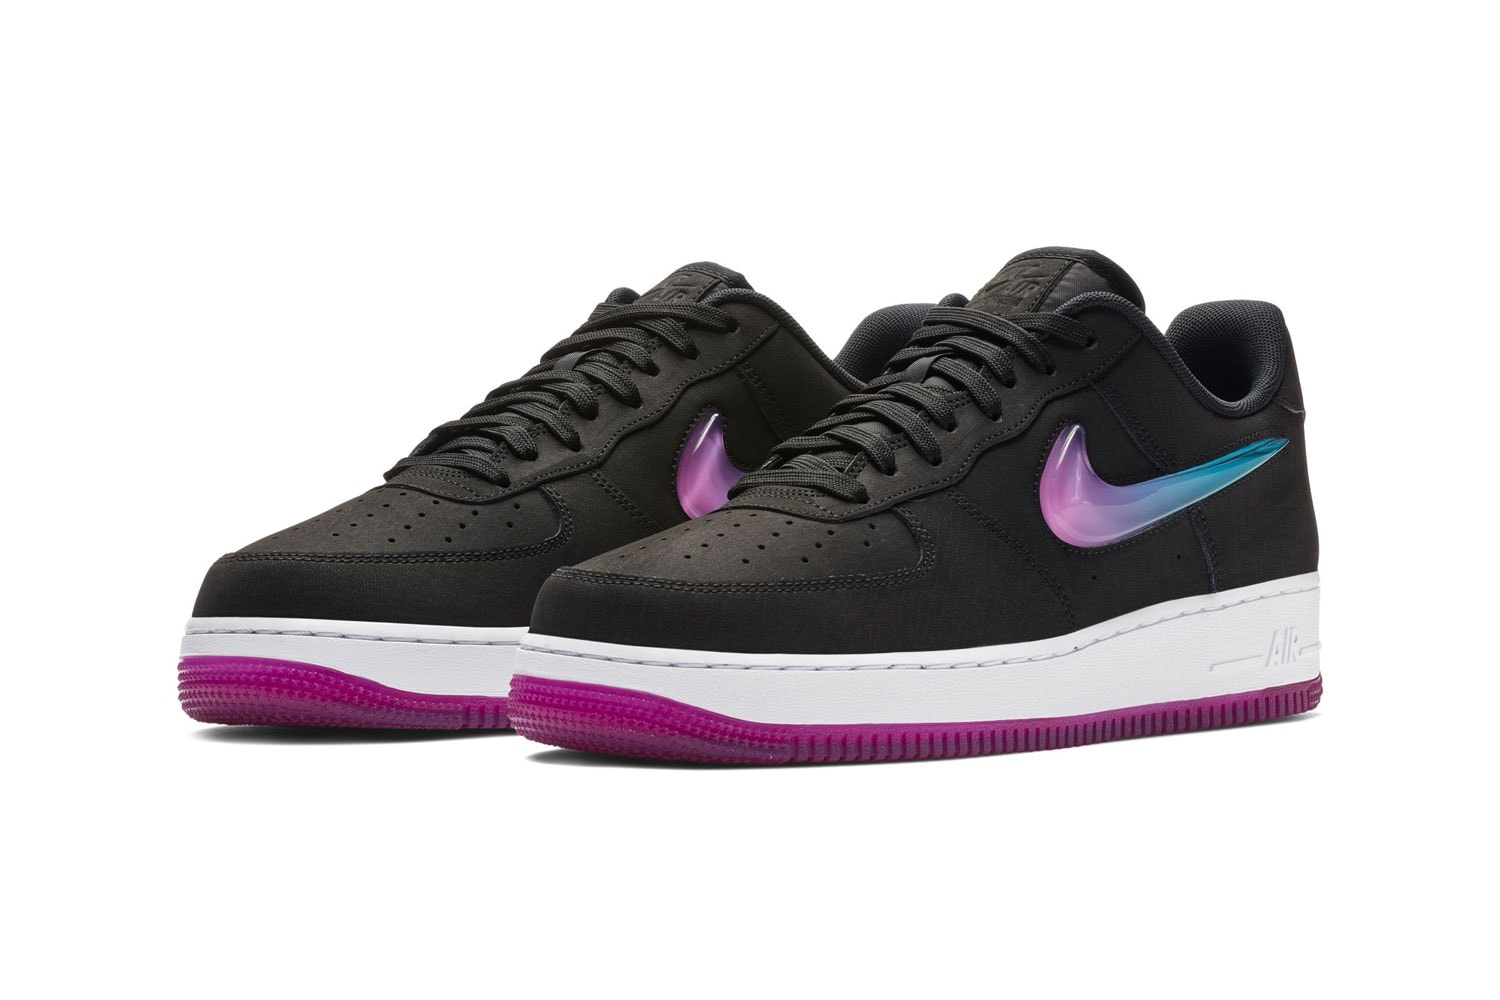 Nike Air Force 1 '07 Premium "Active Fuchsia" Oversized Jewel Swoosh gradient black pink blue colorway sneaker release date info price stockist Color: Black/Active Fuchsia-Blue Lagoon-White Style Code: AT4143 001